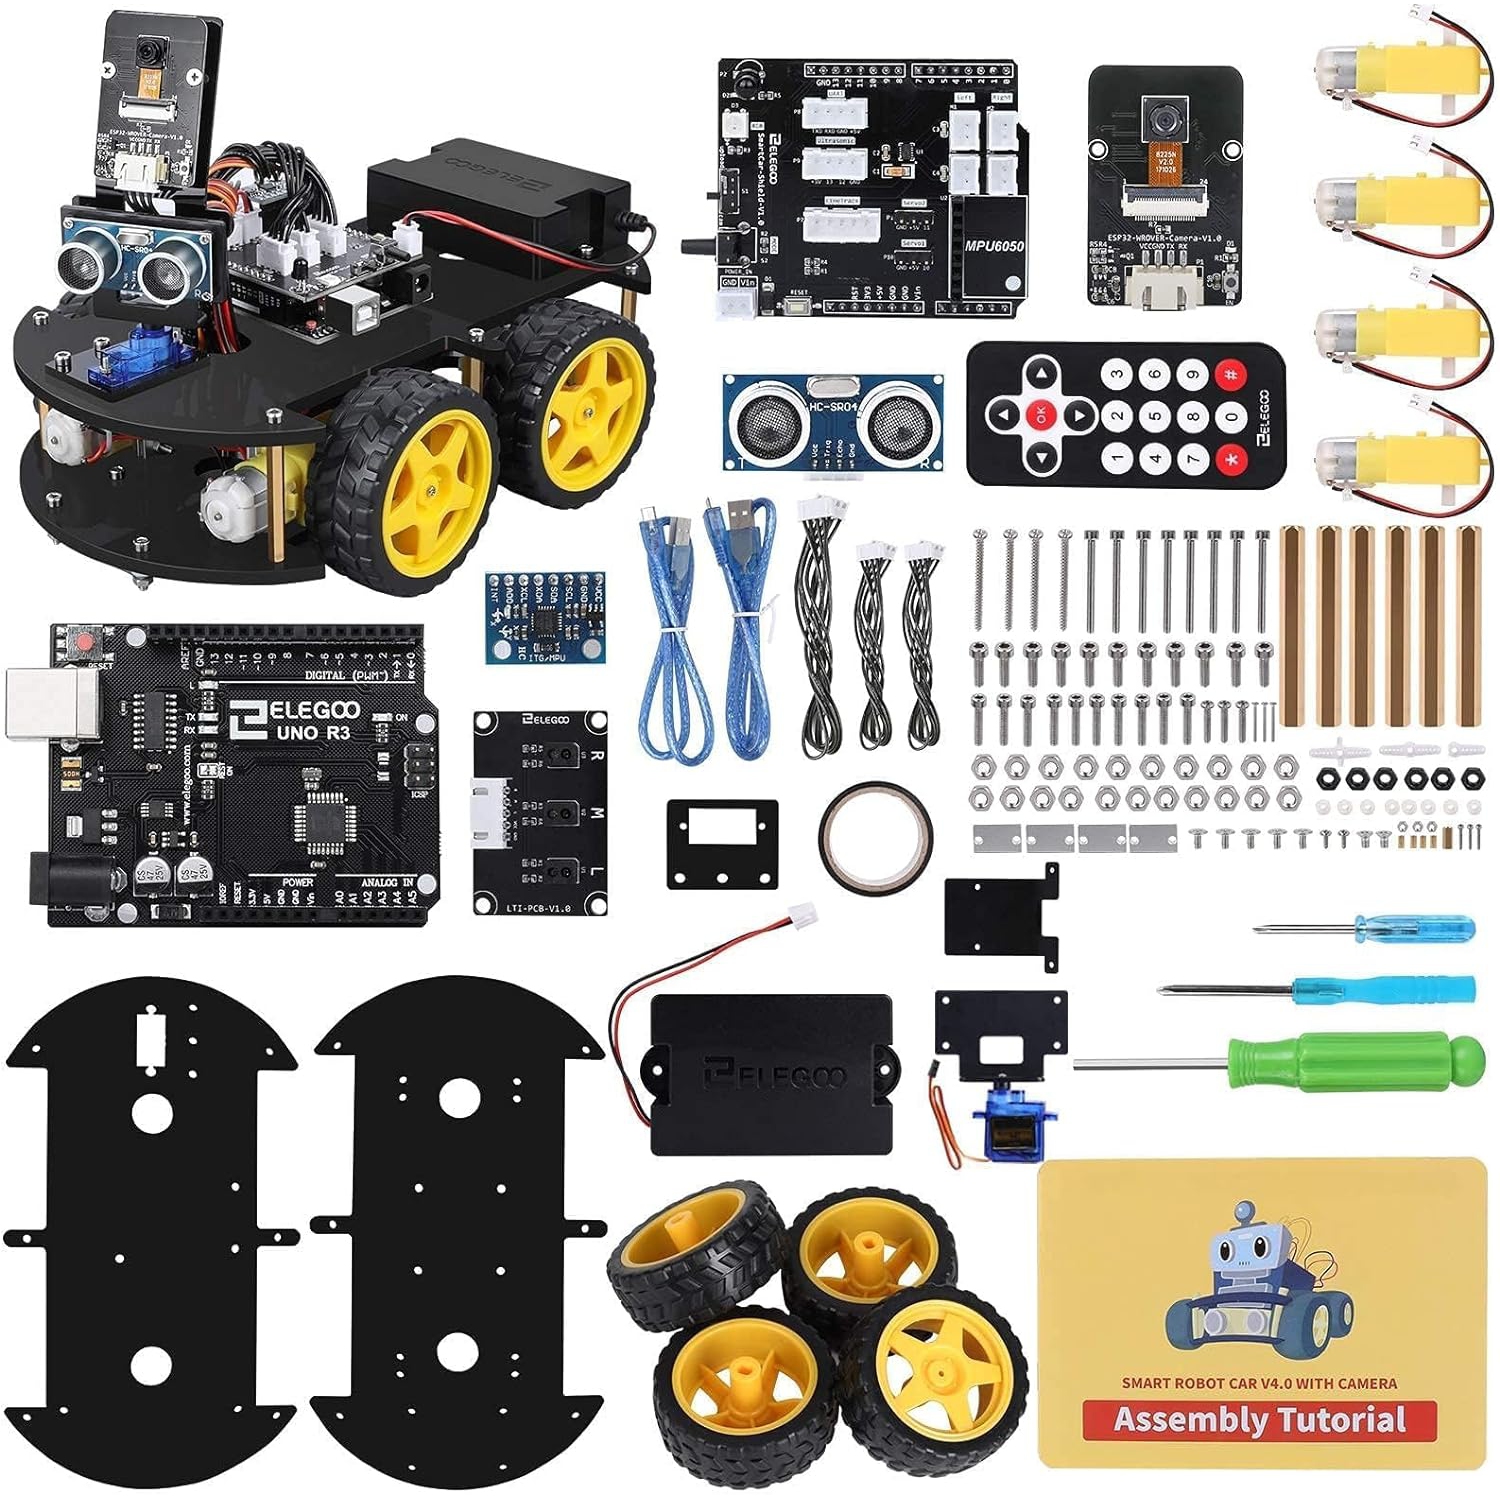 Smart Robot Car Kit V4 with UNO R3, Line Tracking Module, Ultrasonic Sensor, IR Remote Control, and more. Intelligent and Educational Arduino Robotic Kit for Learners